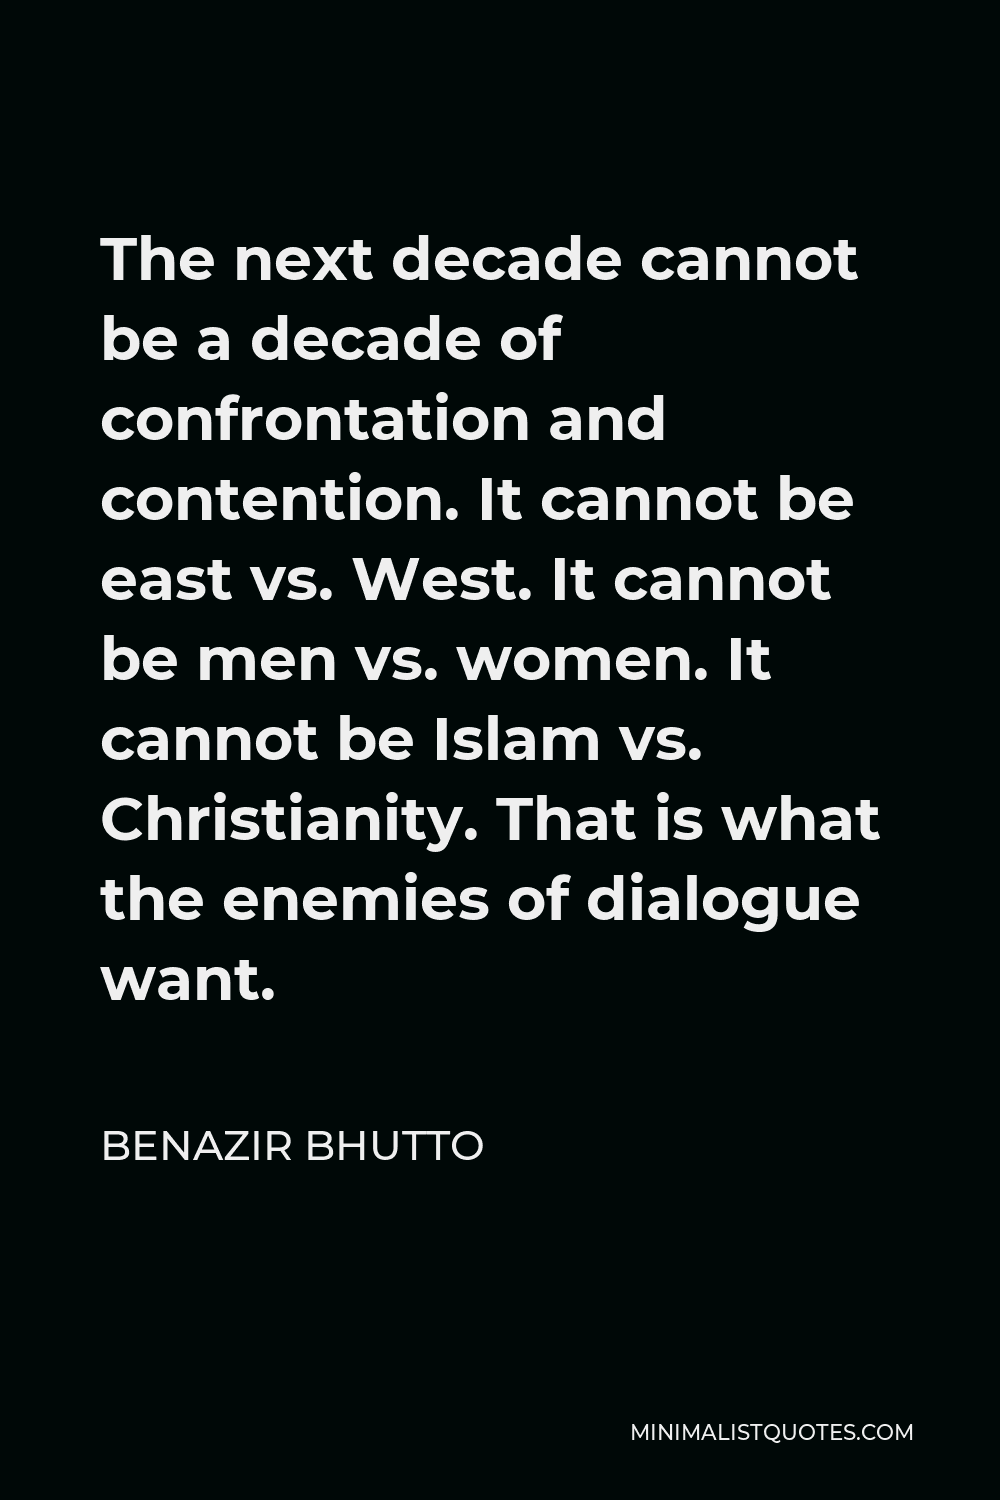 Benazir Bhutto Quote - The next decade cannot be a decade of confrontation and contention. It cannot be east vs. West. It cannot be men vs. women. It cannot be Islam vs. Christianity. That is what the enemies of dialogue want.